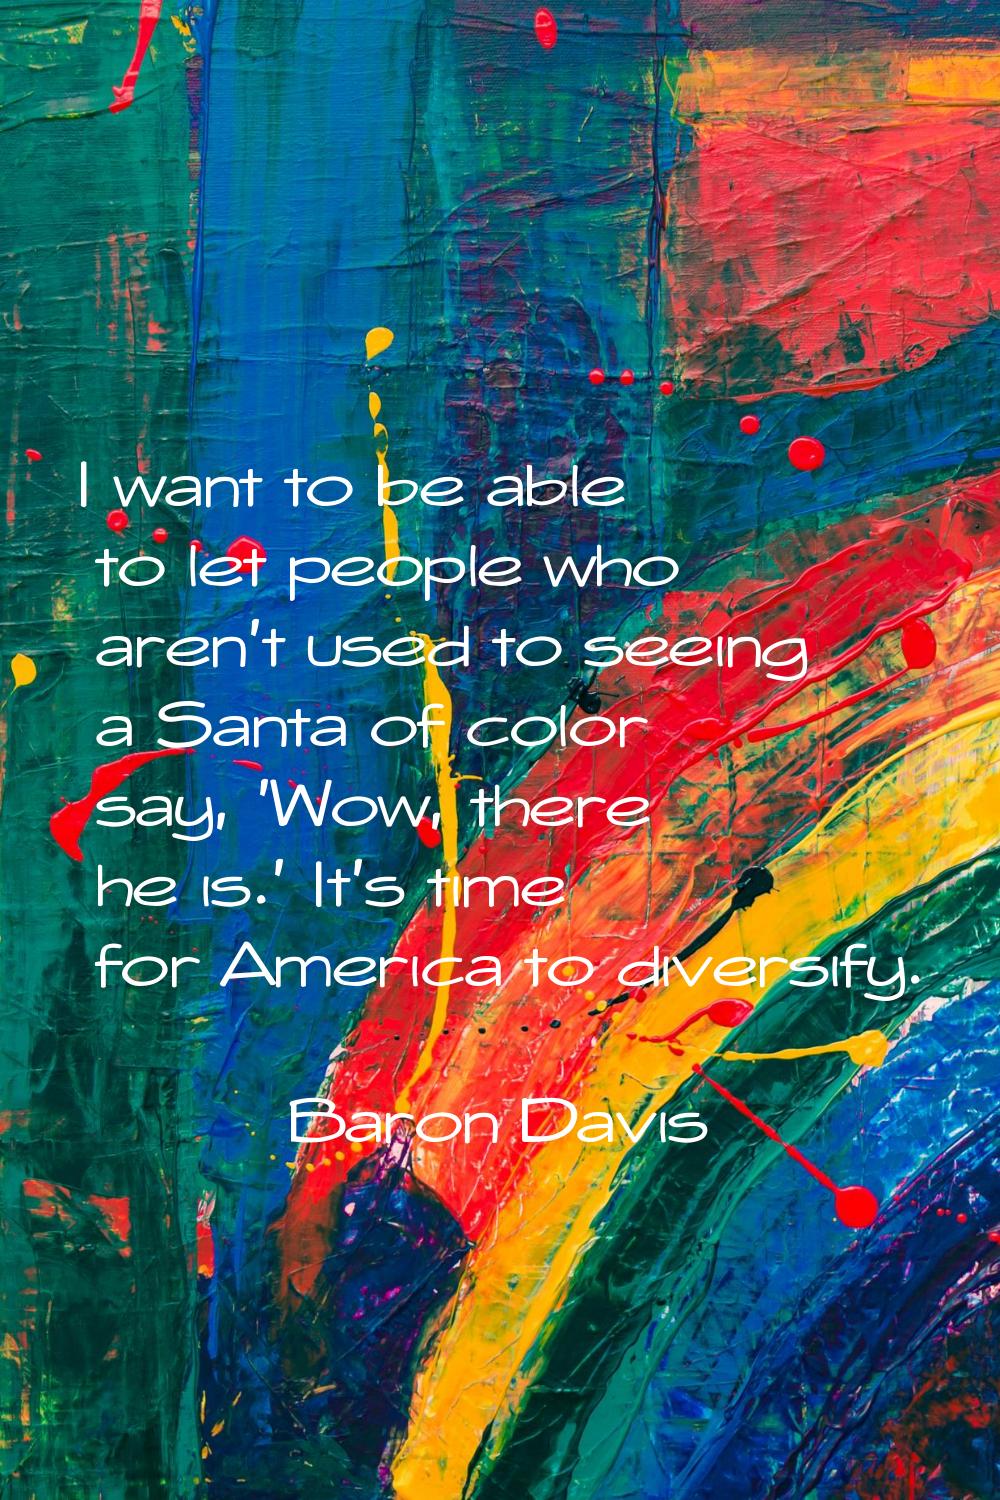 I want to be able to let people who aren't used to seeing a Santa of color say, 'Wow, there he is.'